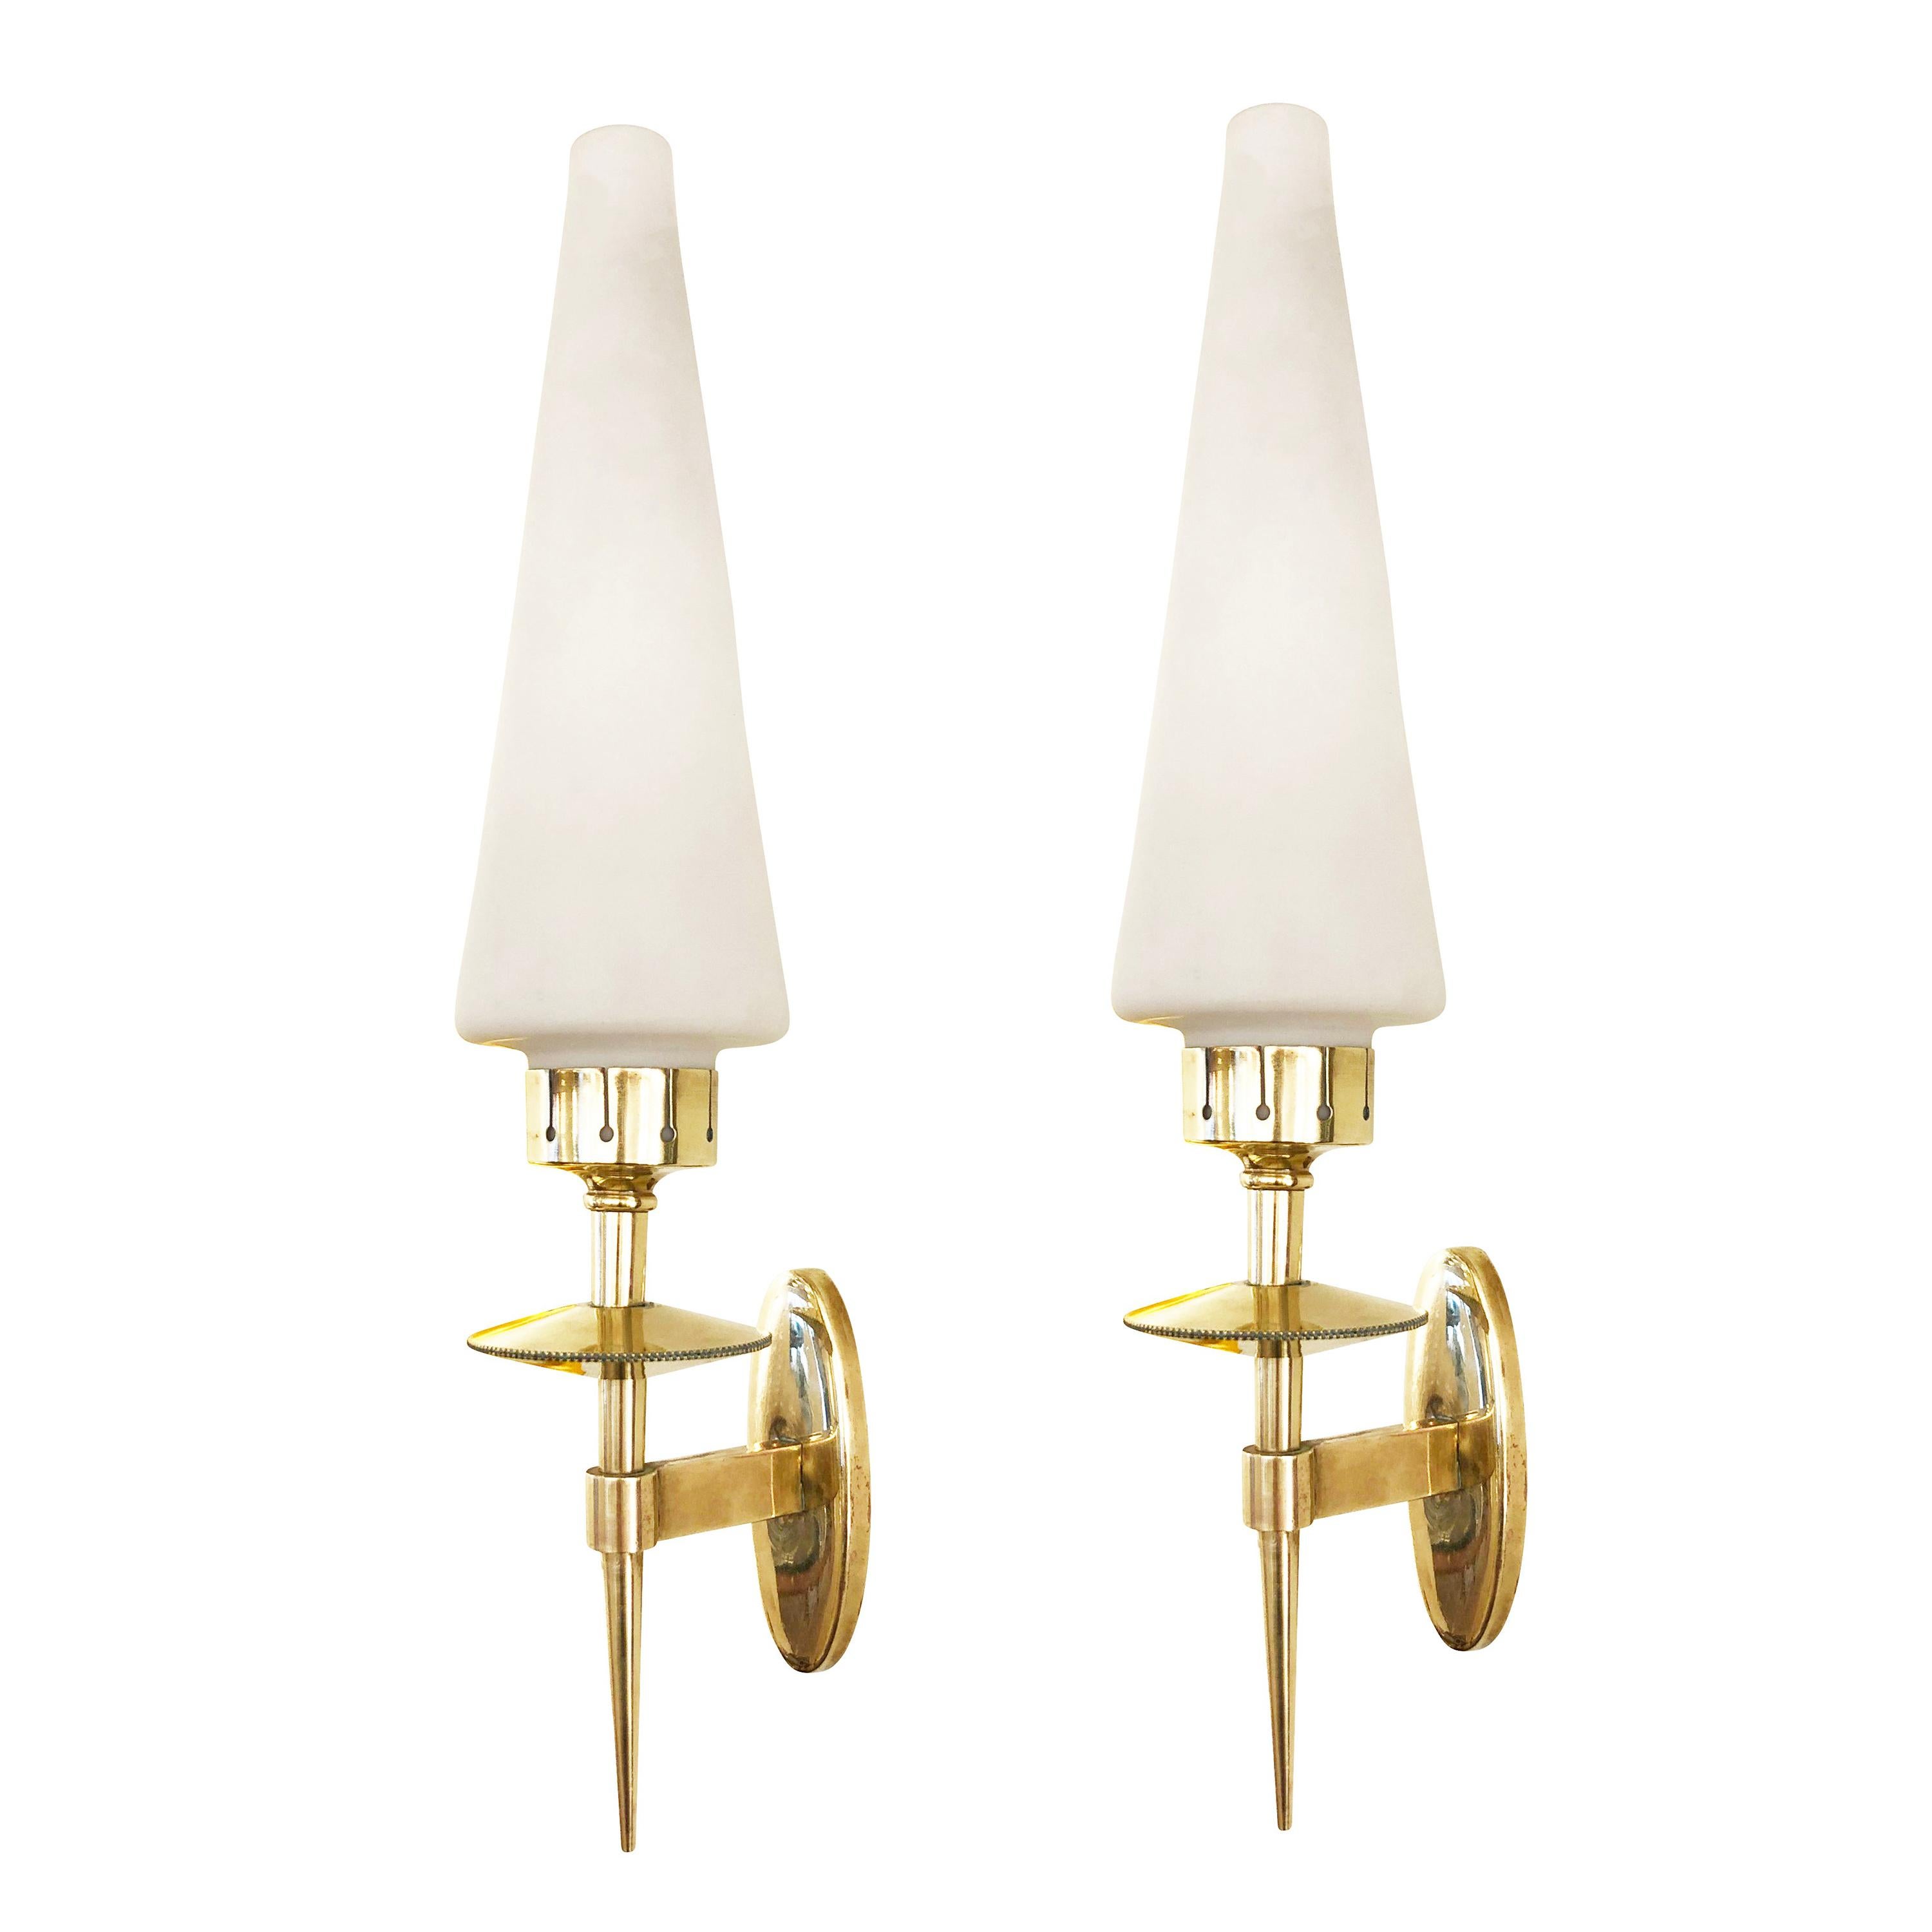 Pair of Conical Midcentury Sconces